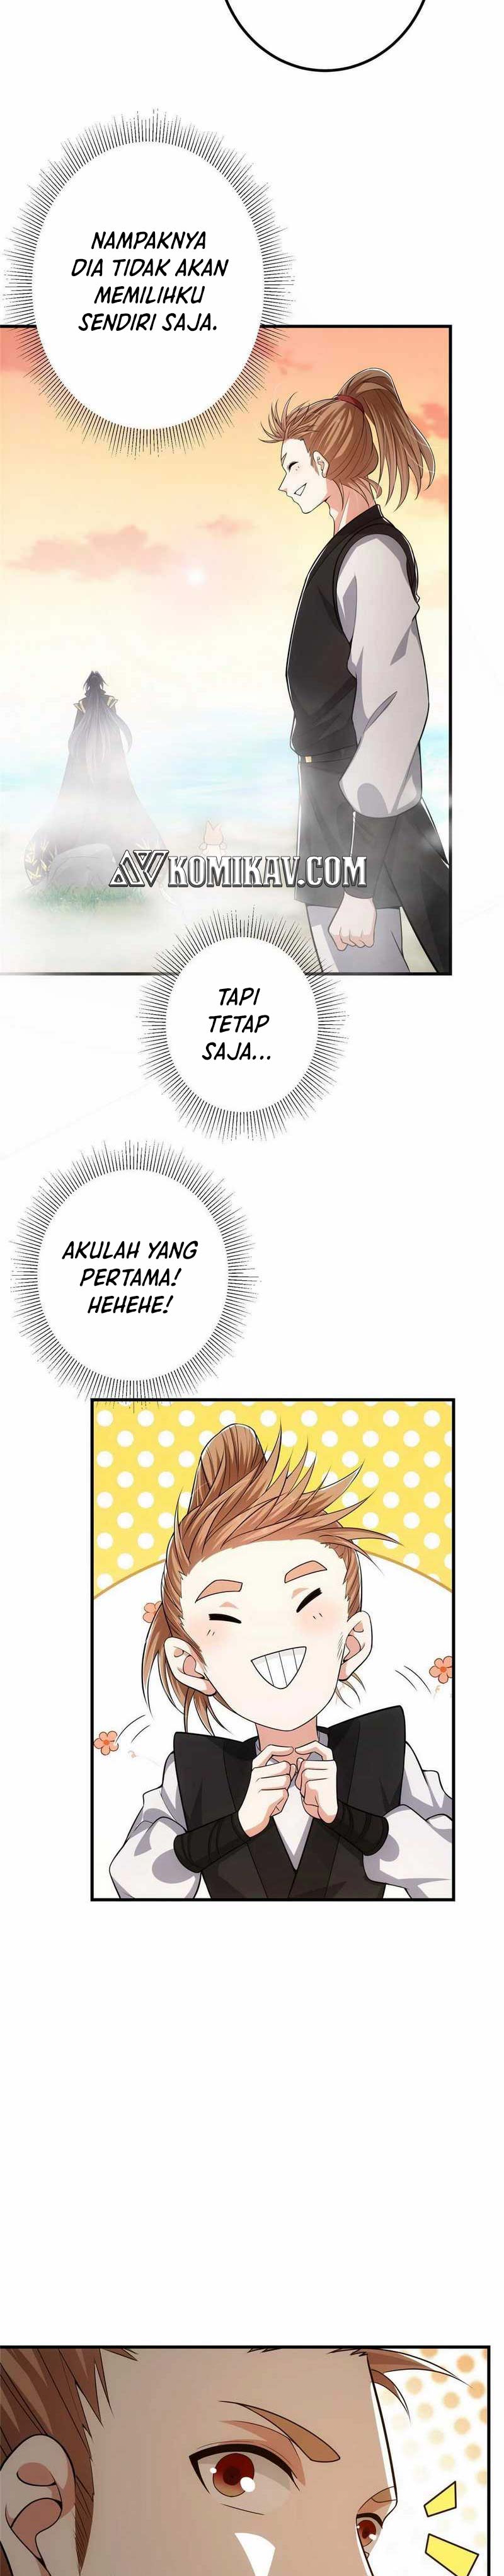 Keep A Low Profile, Sect Leader Chapter 118 Bahasa Indonesia